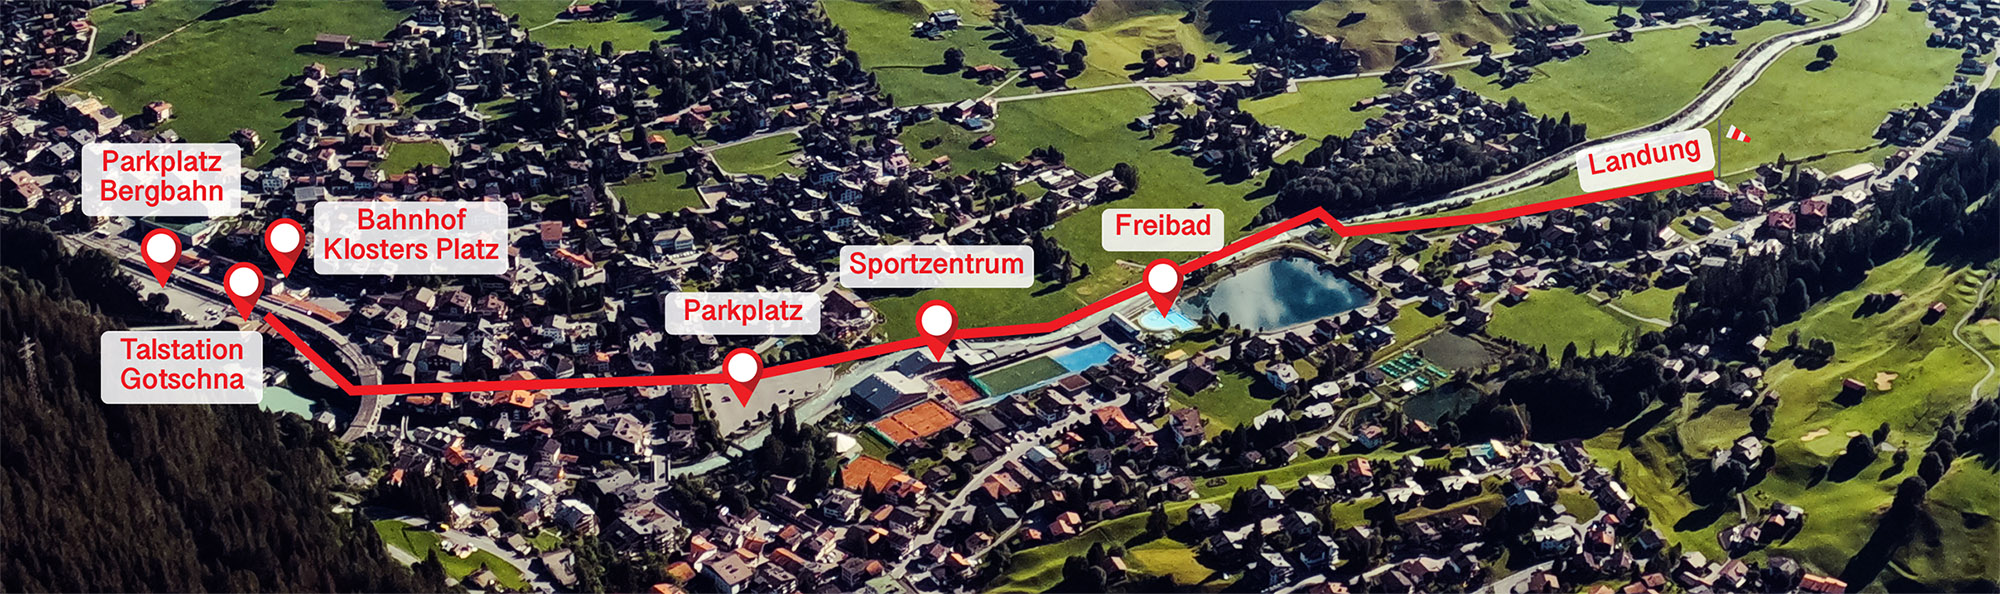 Situationsplan Klosters